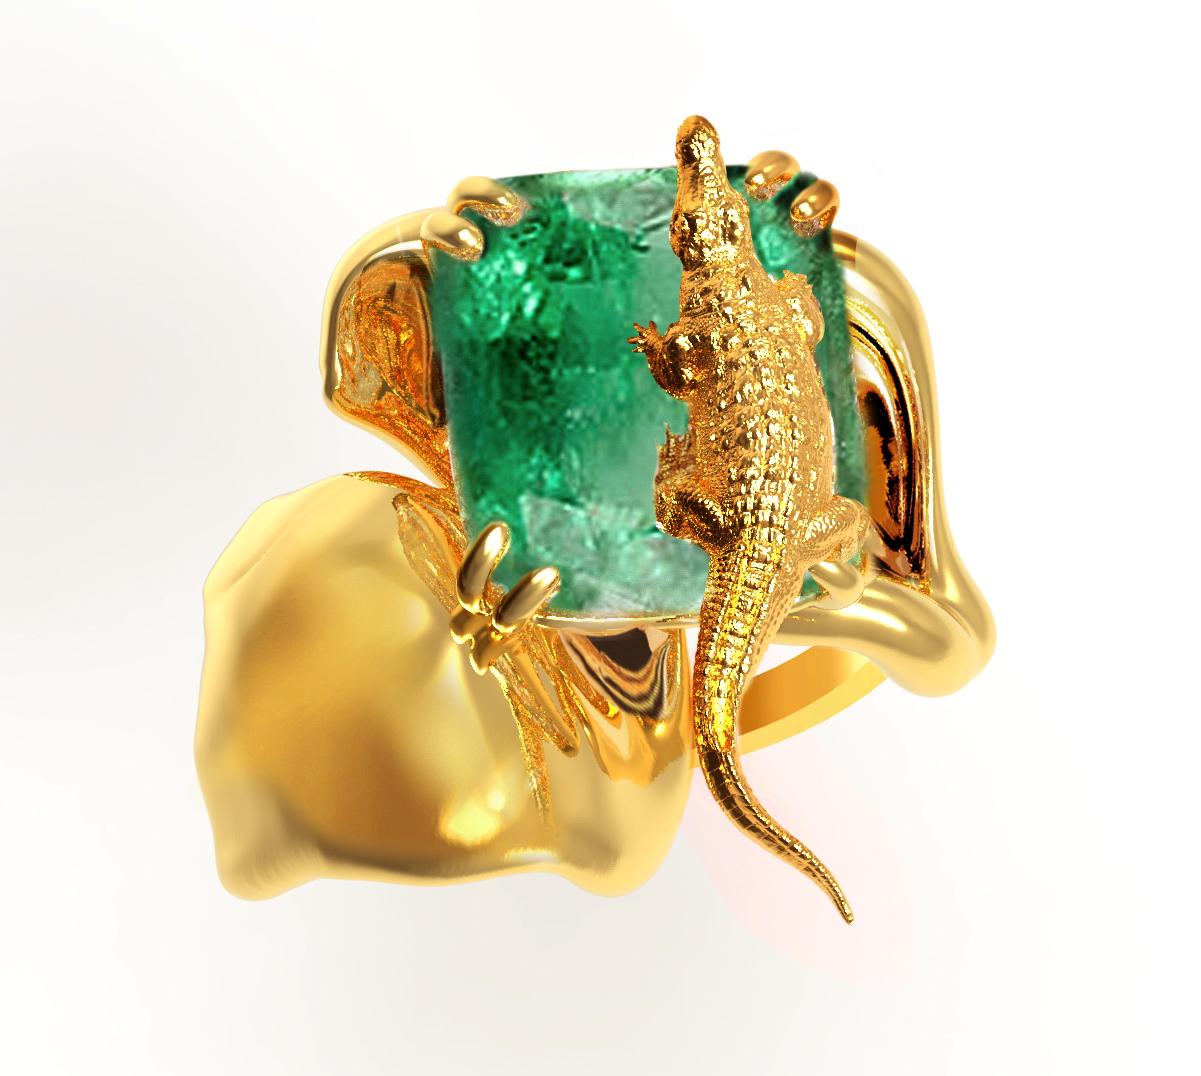 This 18 karat yellow gold contemporary Eden engagement ring is encrusted with natural emerald, 2 carats. The flower size is 2 cm, and the ring is part of the Mesopotamian collection designed by oil painter and 3D jewelry designer Polya Medvedeva.